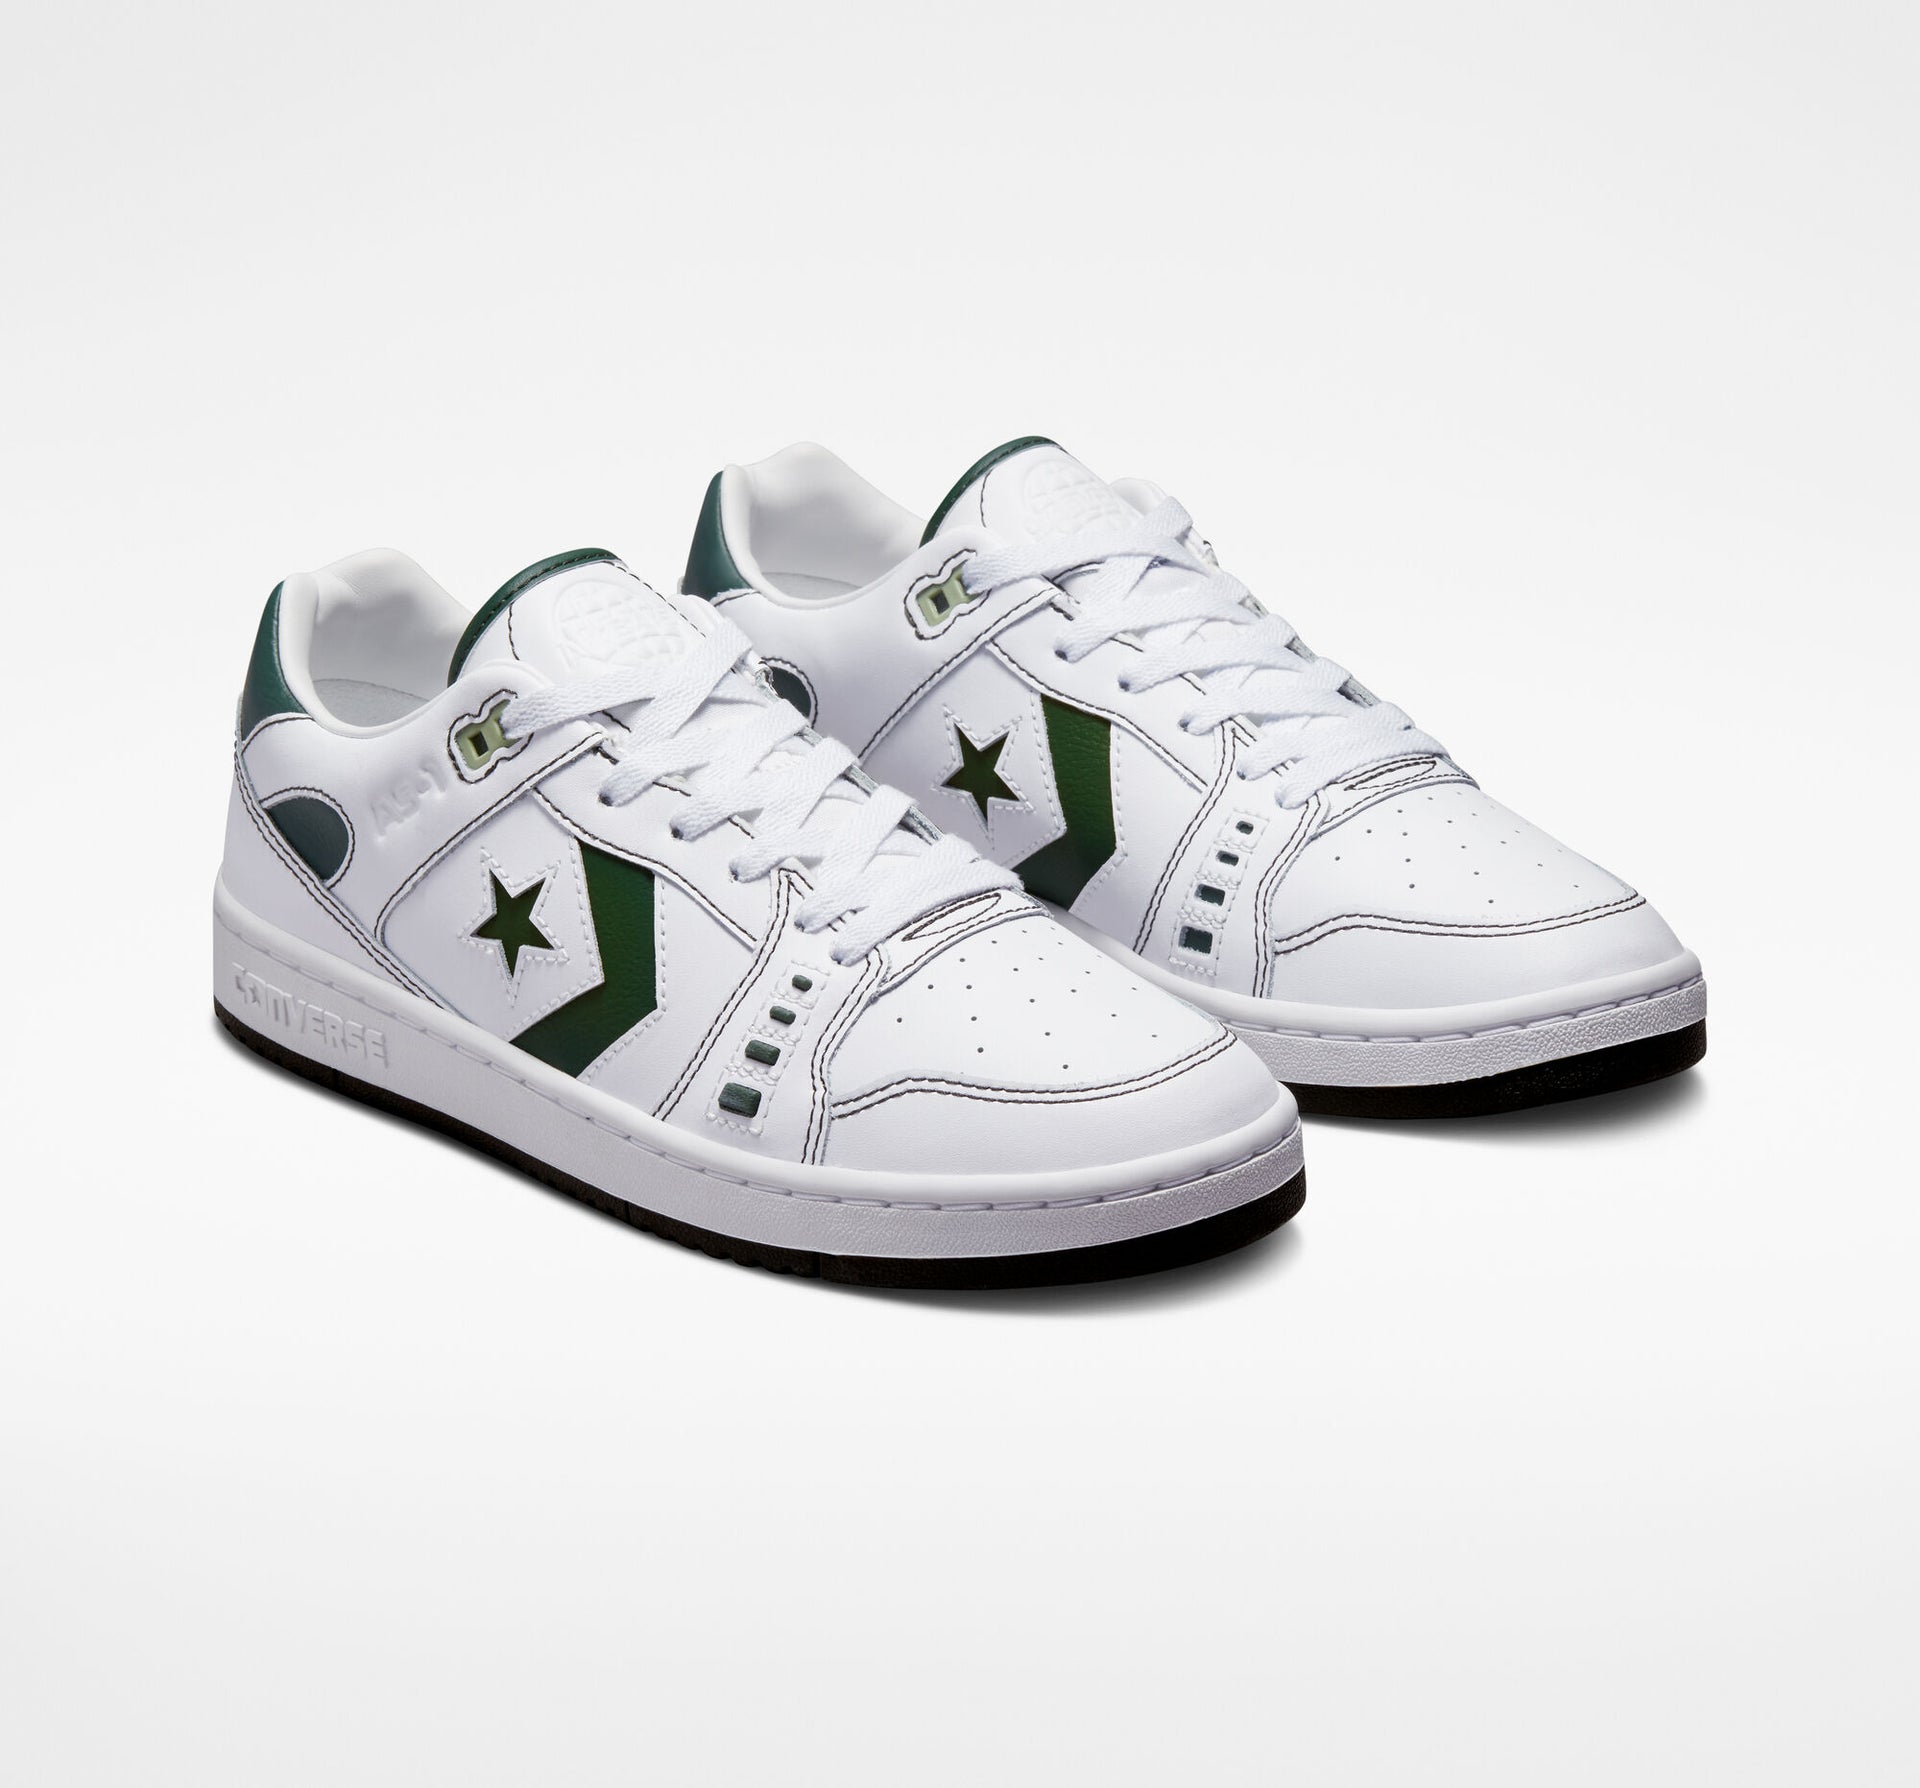 Convers Cons AS-1 Pro Ox